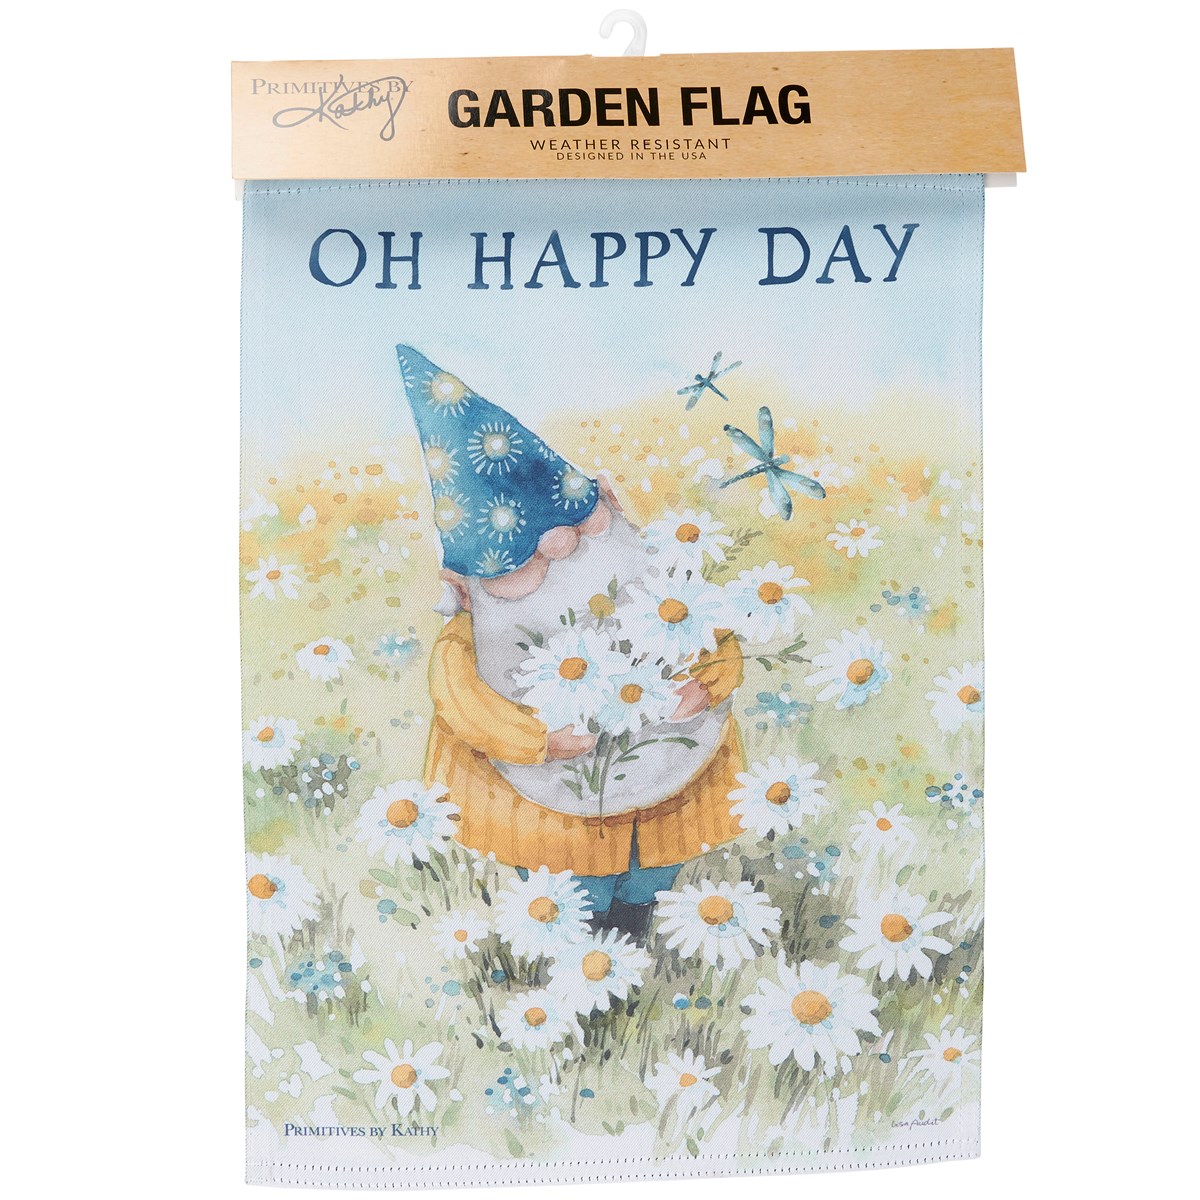 Oh Happy Day Garden Flag - Polyester